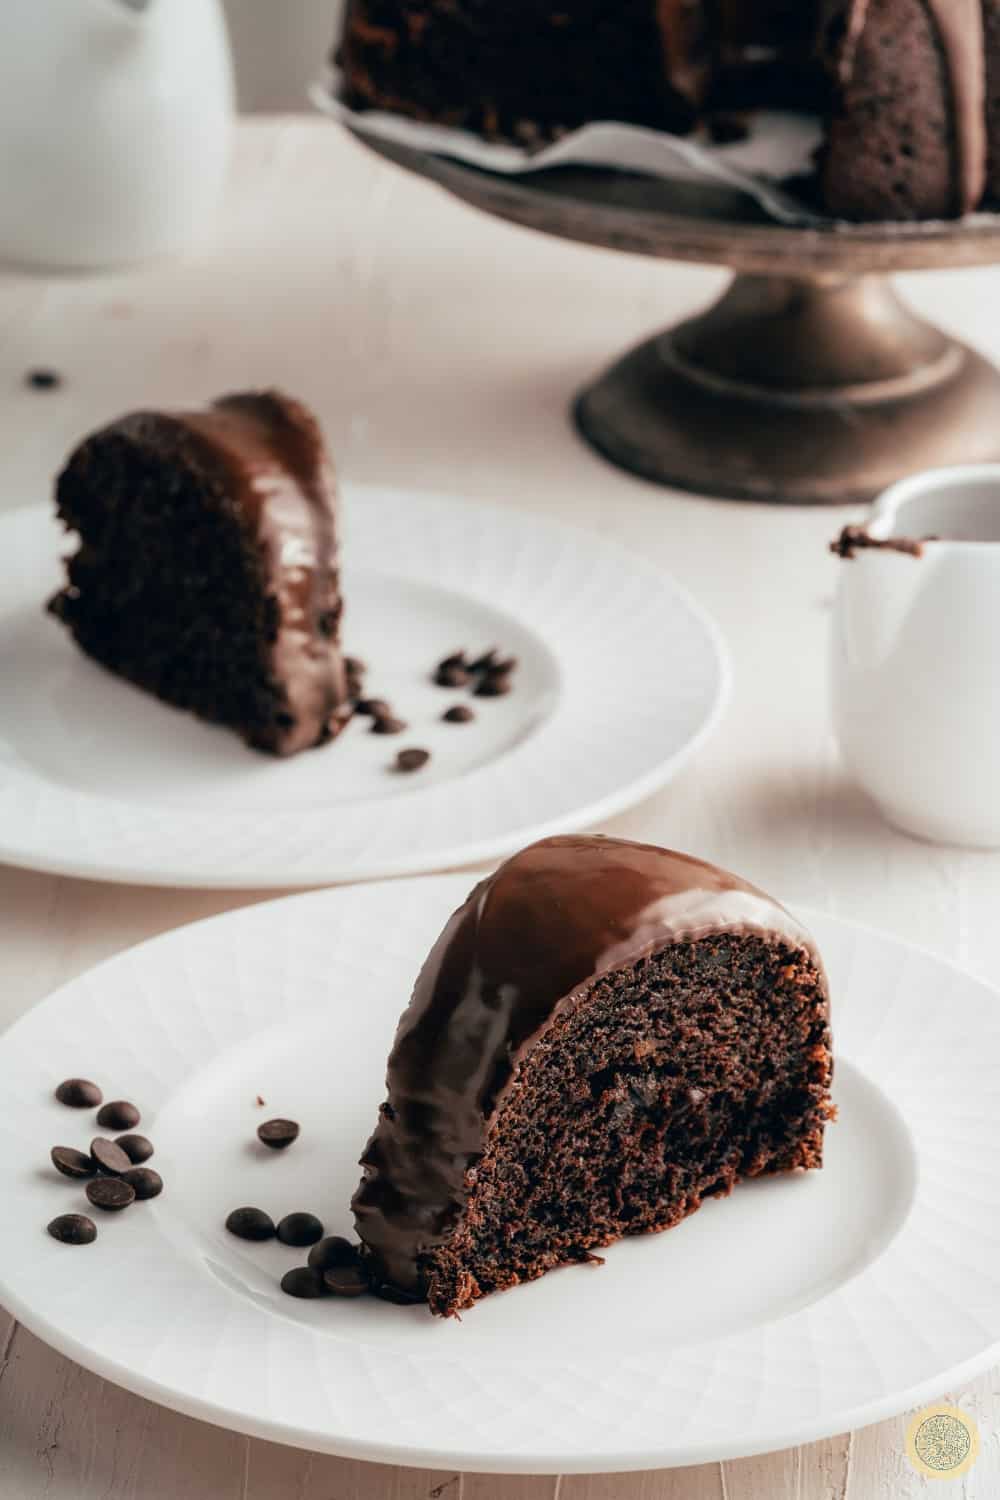 Can I leave cake in bundt pan overnight?